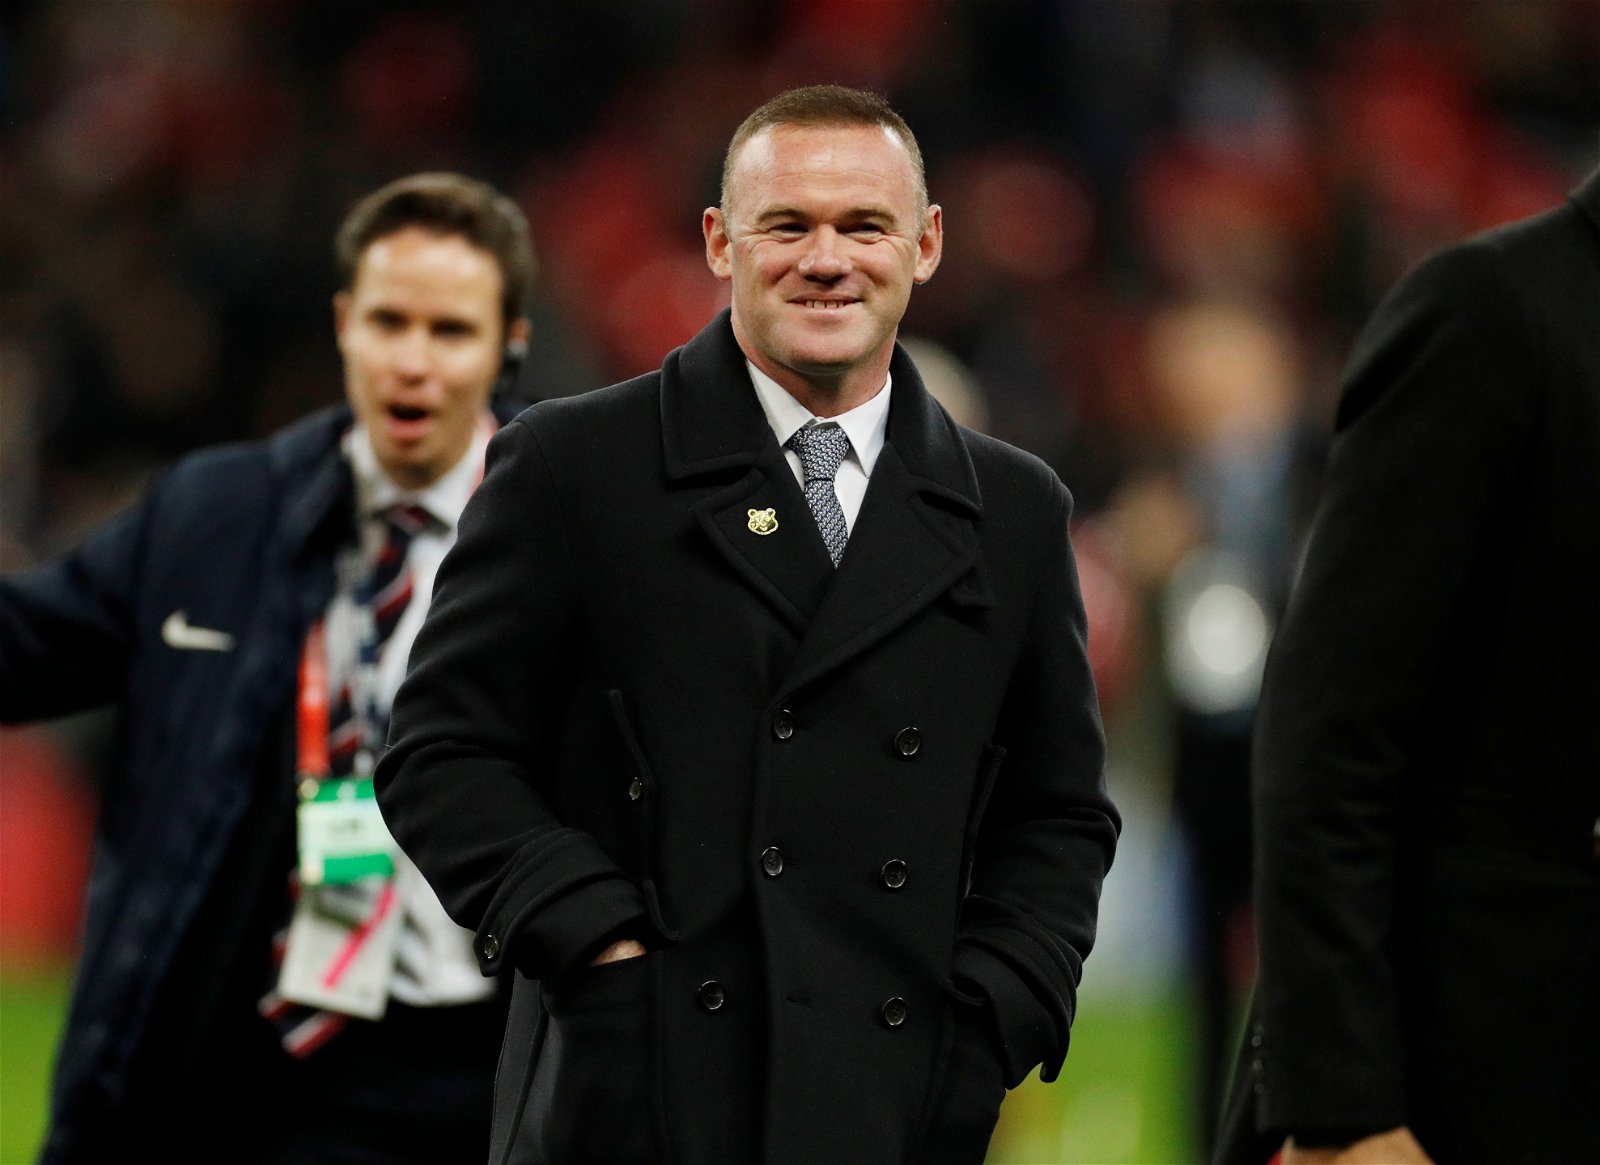 Wayne Rooney intersted to become a short-term manager of Newcastle